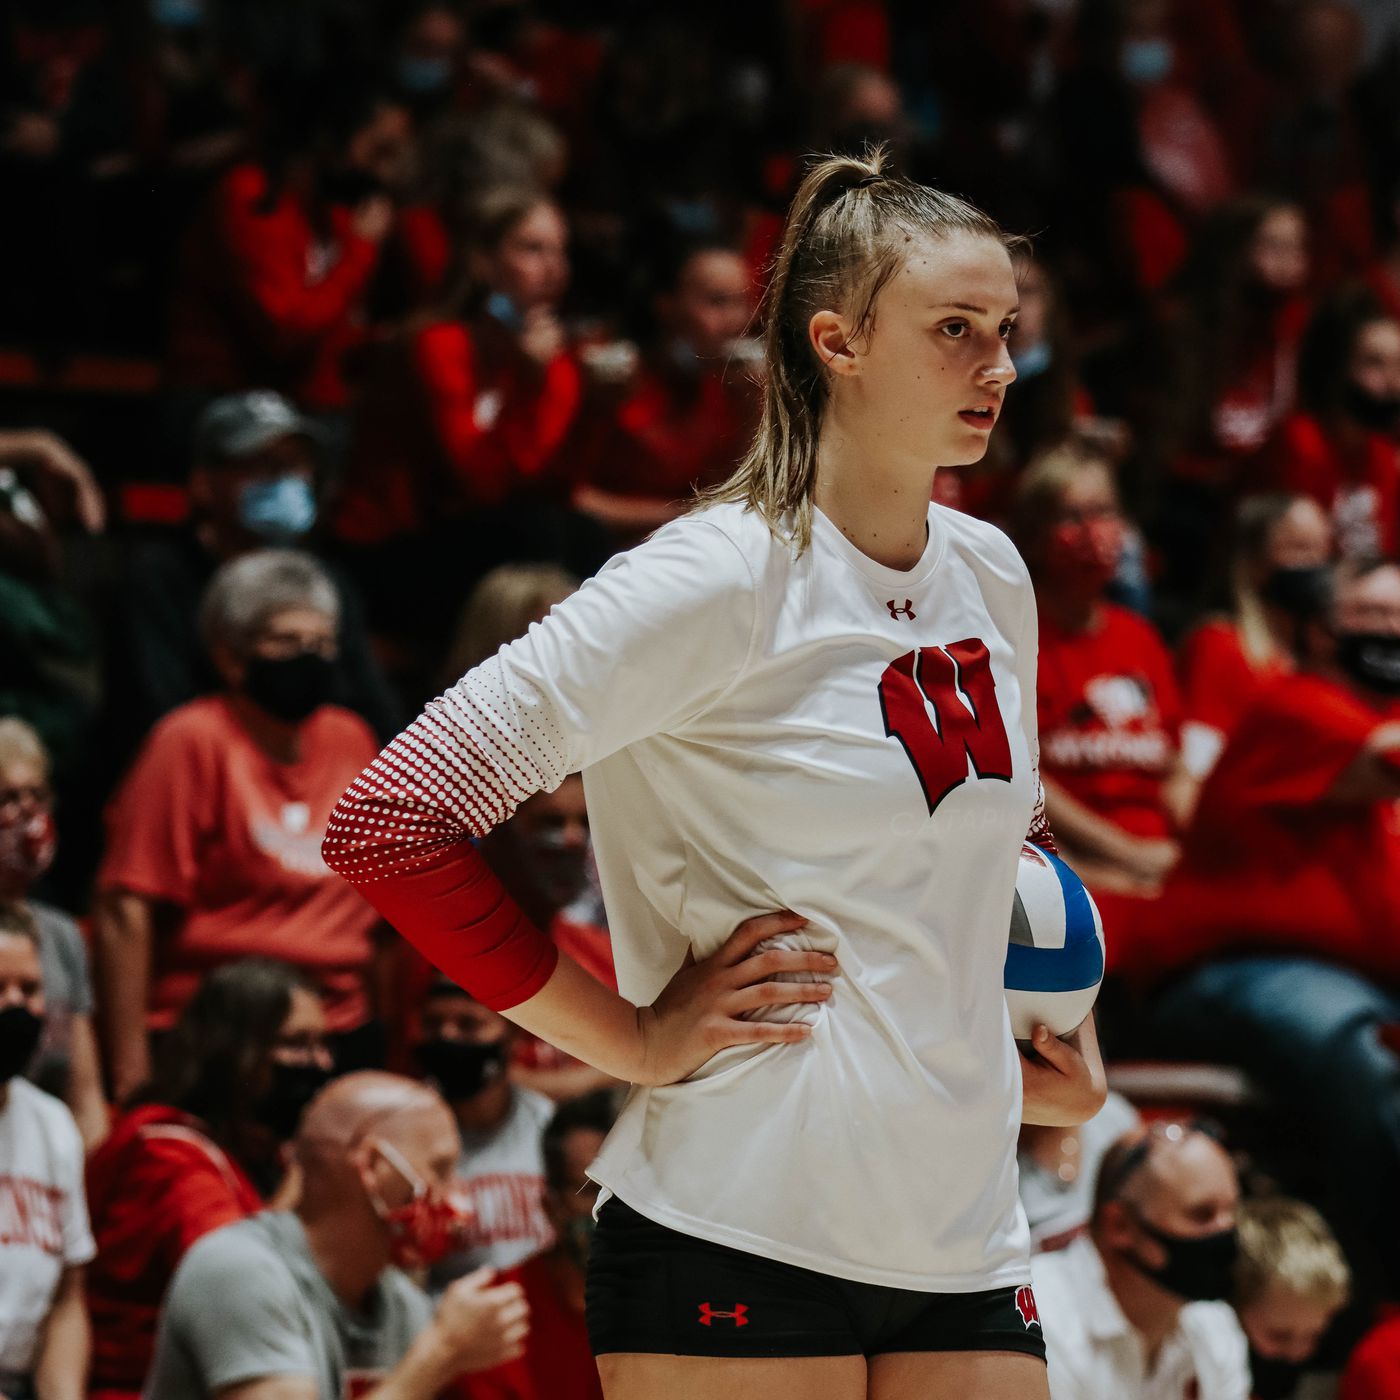 Wisconsin volleyball: No. 3 Badgers sweep No. 6 Huskers thanks to Anna Smrek - Bucky's 5th Quarter